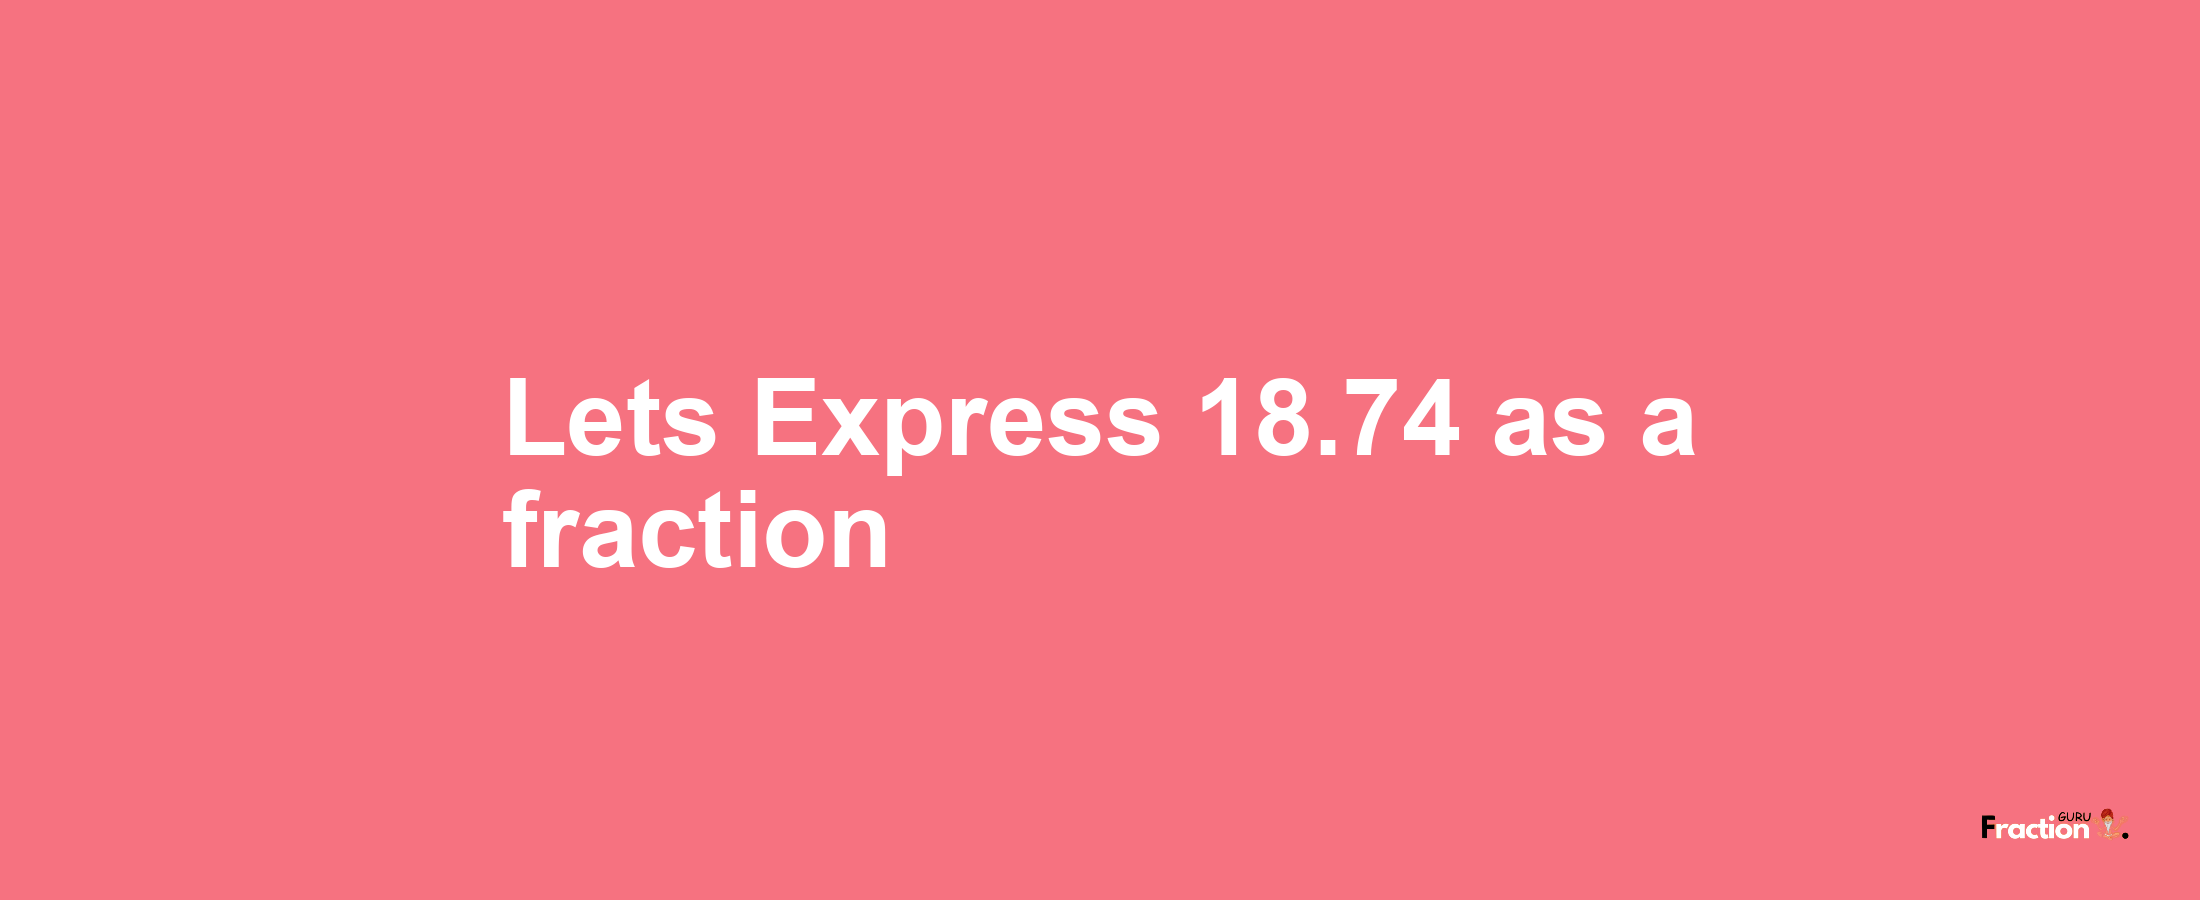 Lets Express 18.74 as afraction